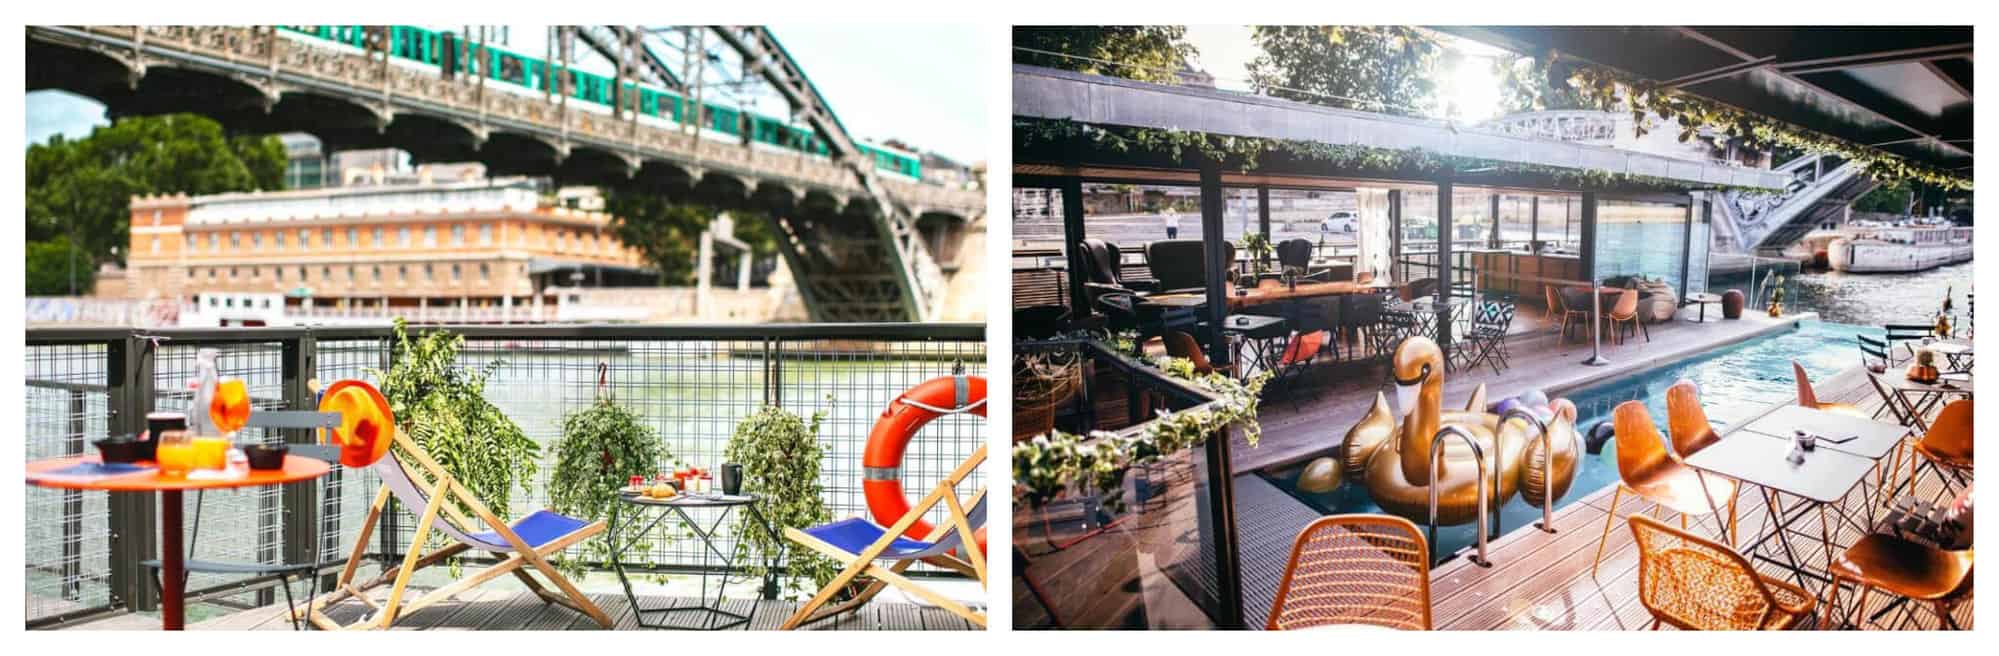 Left: A terrace with blue chairs and orange tables and a view of a green Parisian train passing by a bridge. Right: A brown swan buoy floating on a blue pool in the middle of a restaurant.